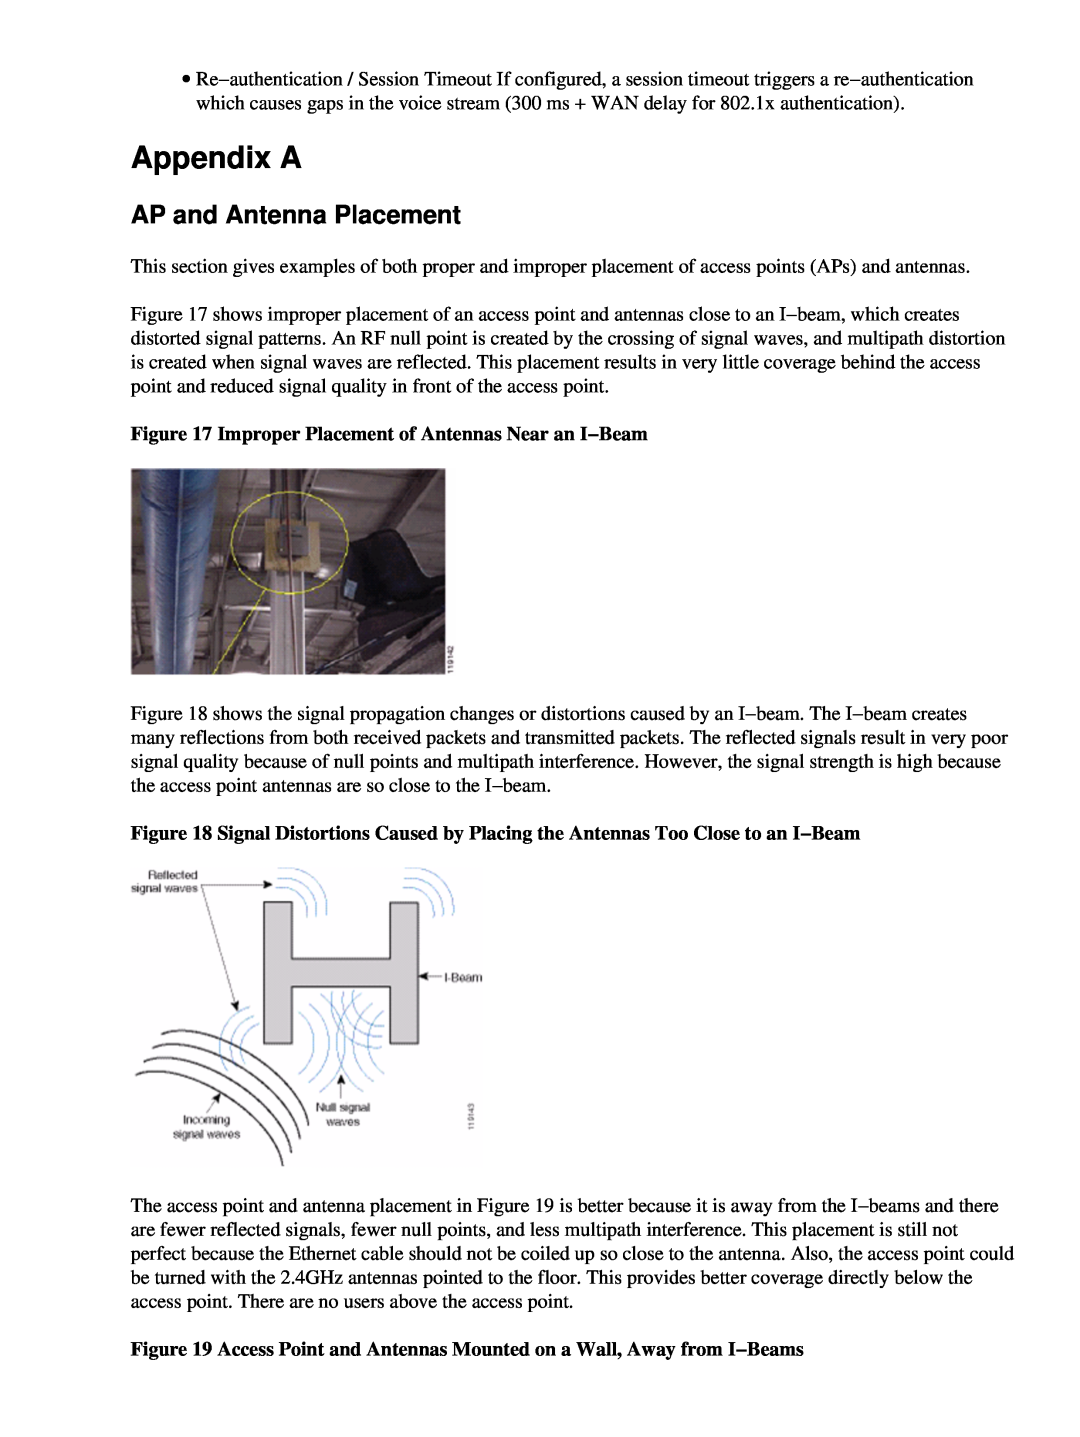 Cisco Systems 71642 manual Appendix A, AP and Antenna Placement, Improper Placement of Antennas Near an I−Beam 